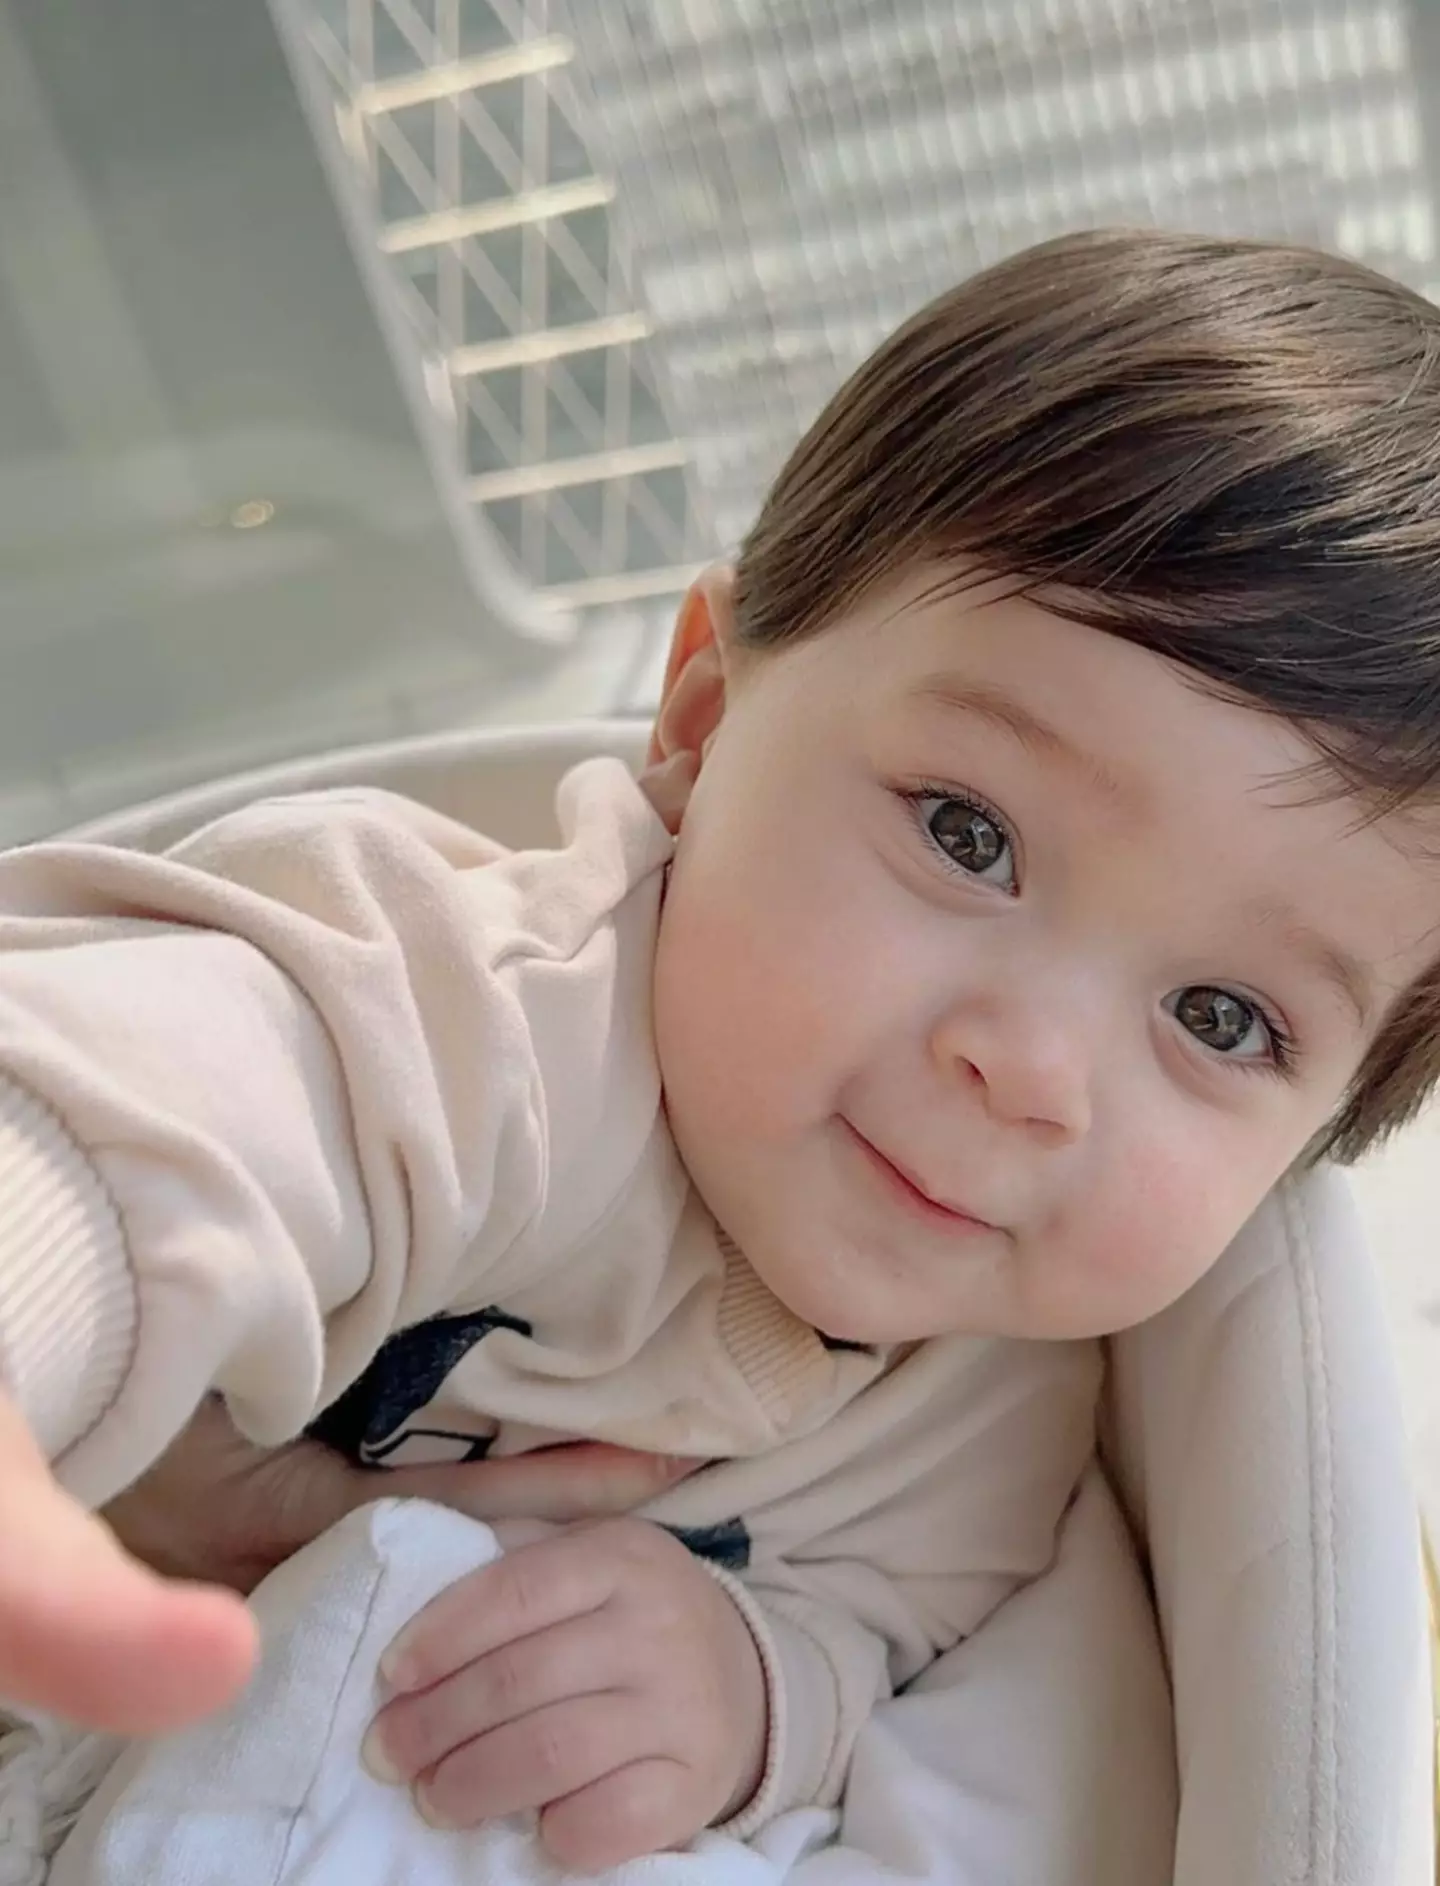 15-month-old Asher has died.